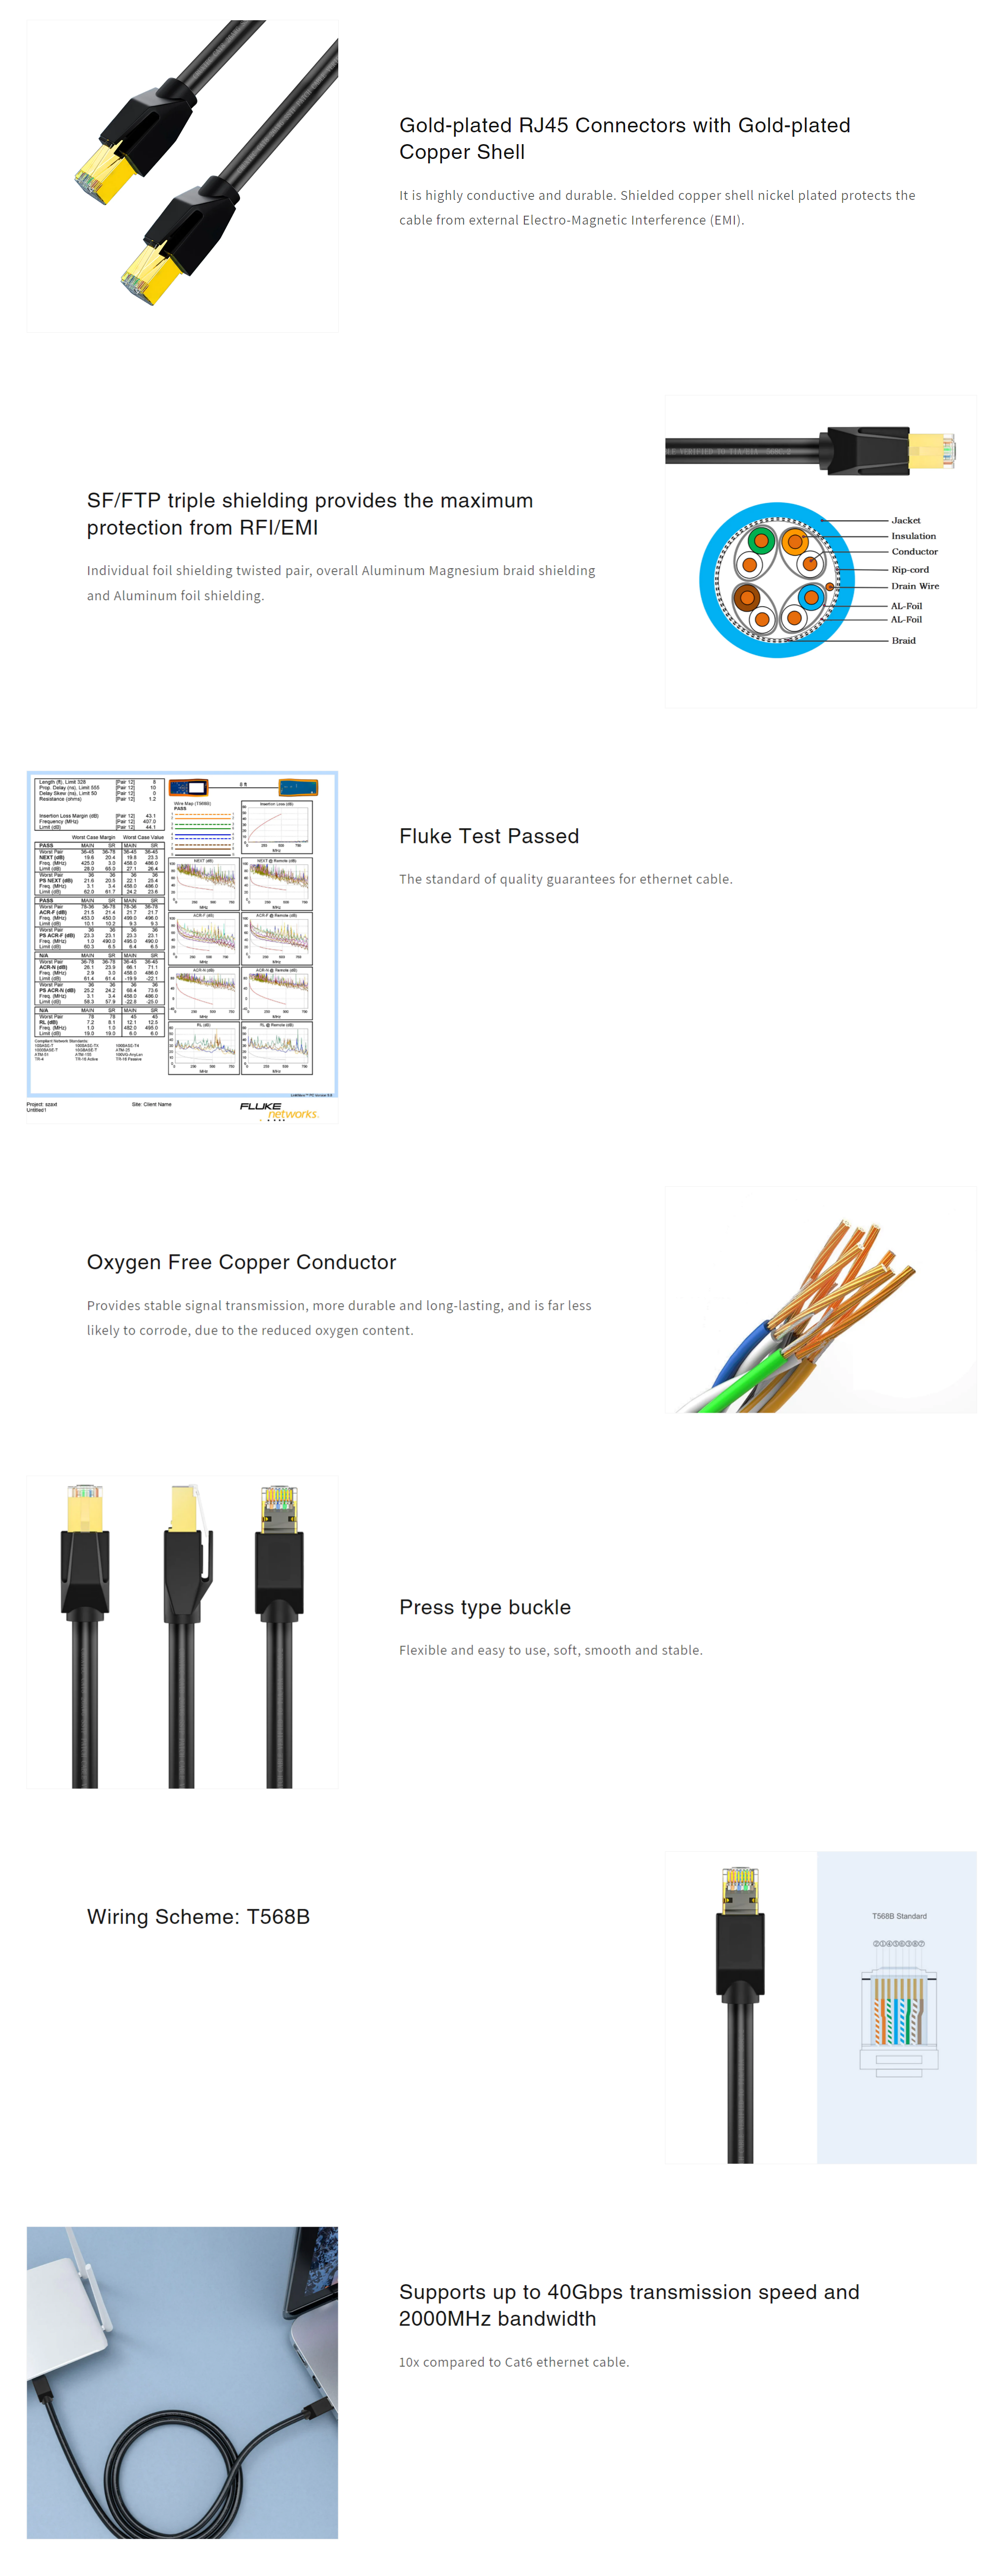 A large marketing image providing additional information about the product Cruxtec CAT8 10m 40GbE SF/FTP Triple Shielding Ethernet Cable Black - Additional alt info not provided